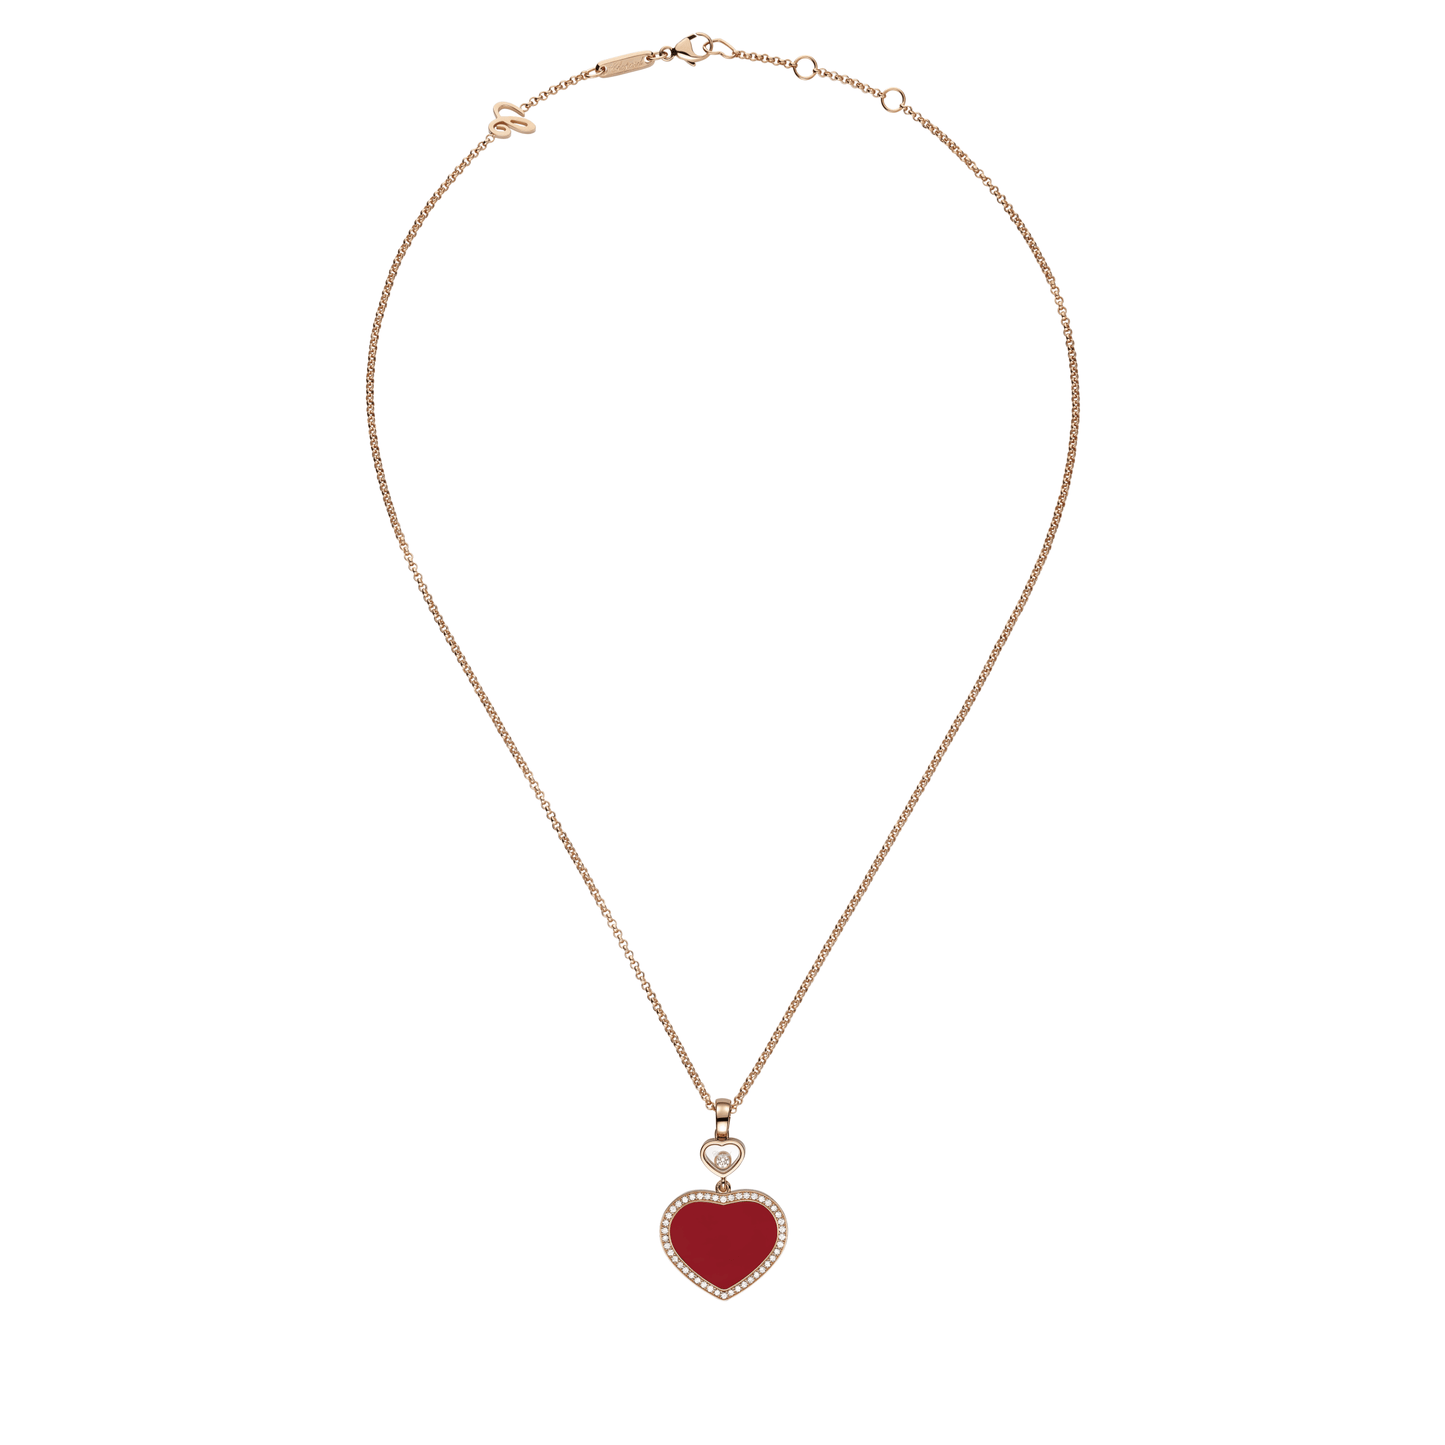 HAPPY HEARTS PENDANT, ETHICAL ROSE GOLD, DIAMOND, RED STONE 79A074-5801